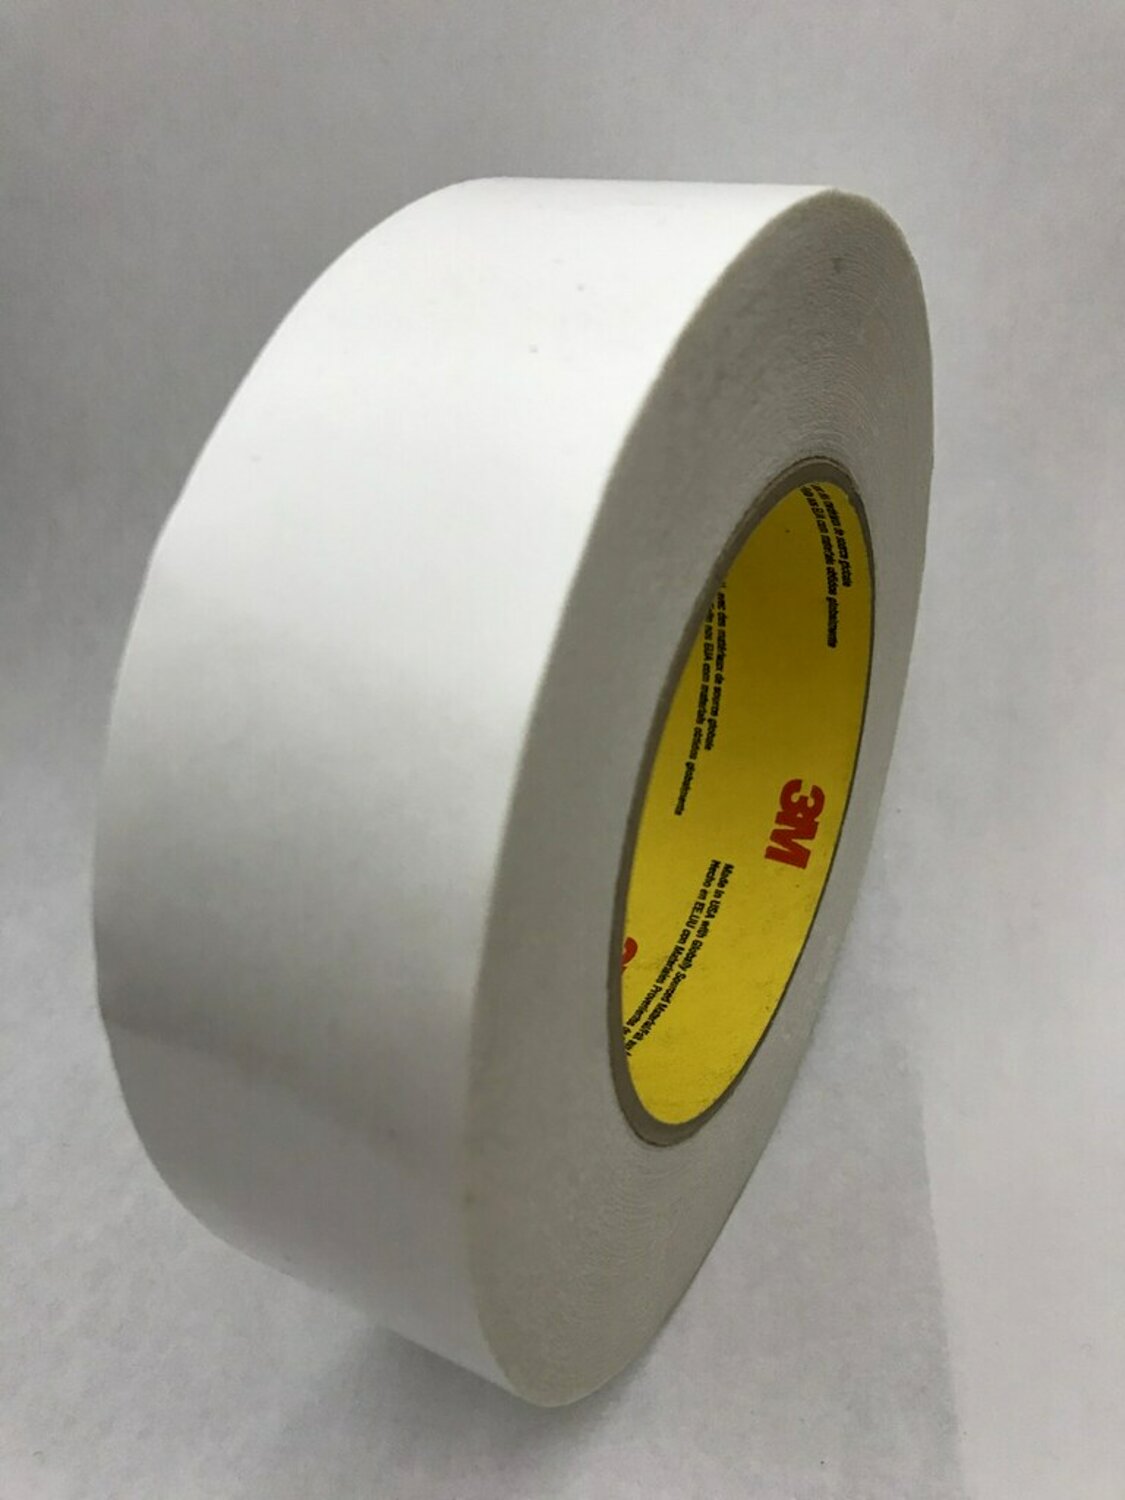 3M Outdoor Masking Poly Tape 5903 Red 48 mm x 54.8 M 7.5 Mil